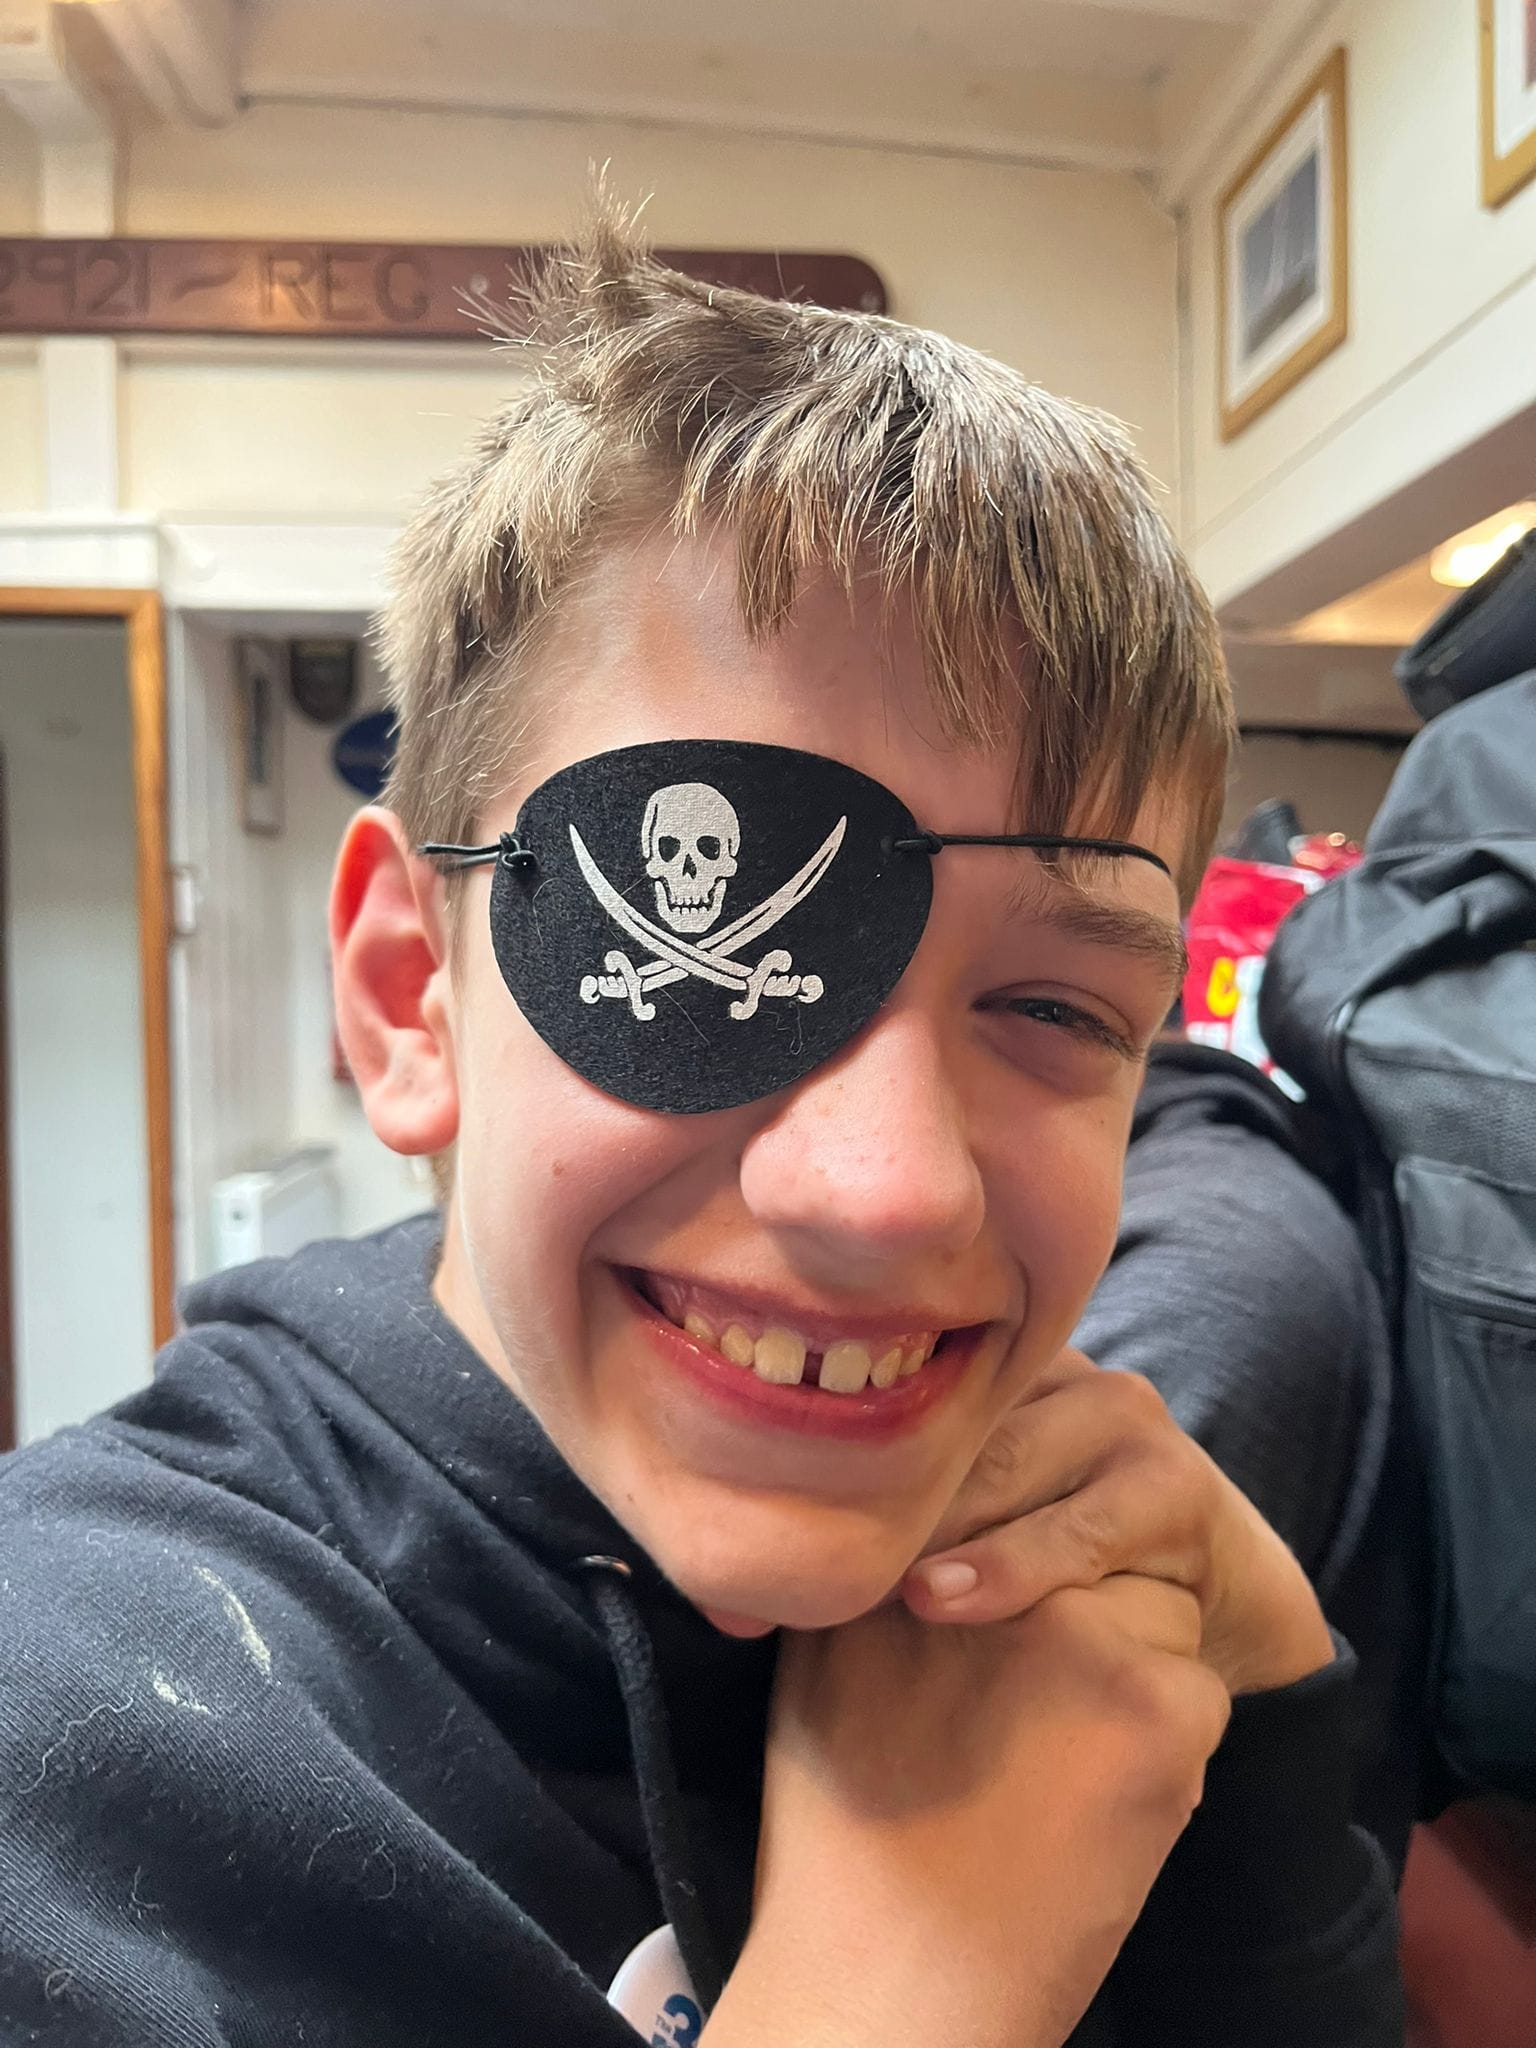 A boy smiling at the camera with a pirate eye patch on.